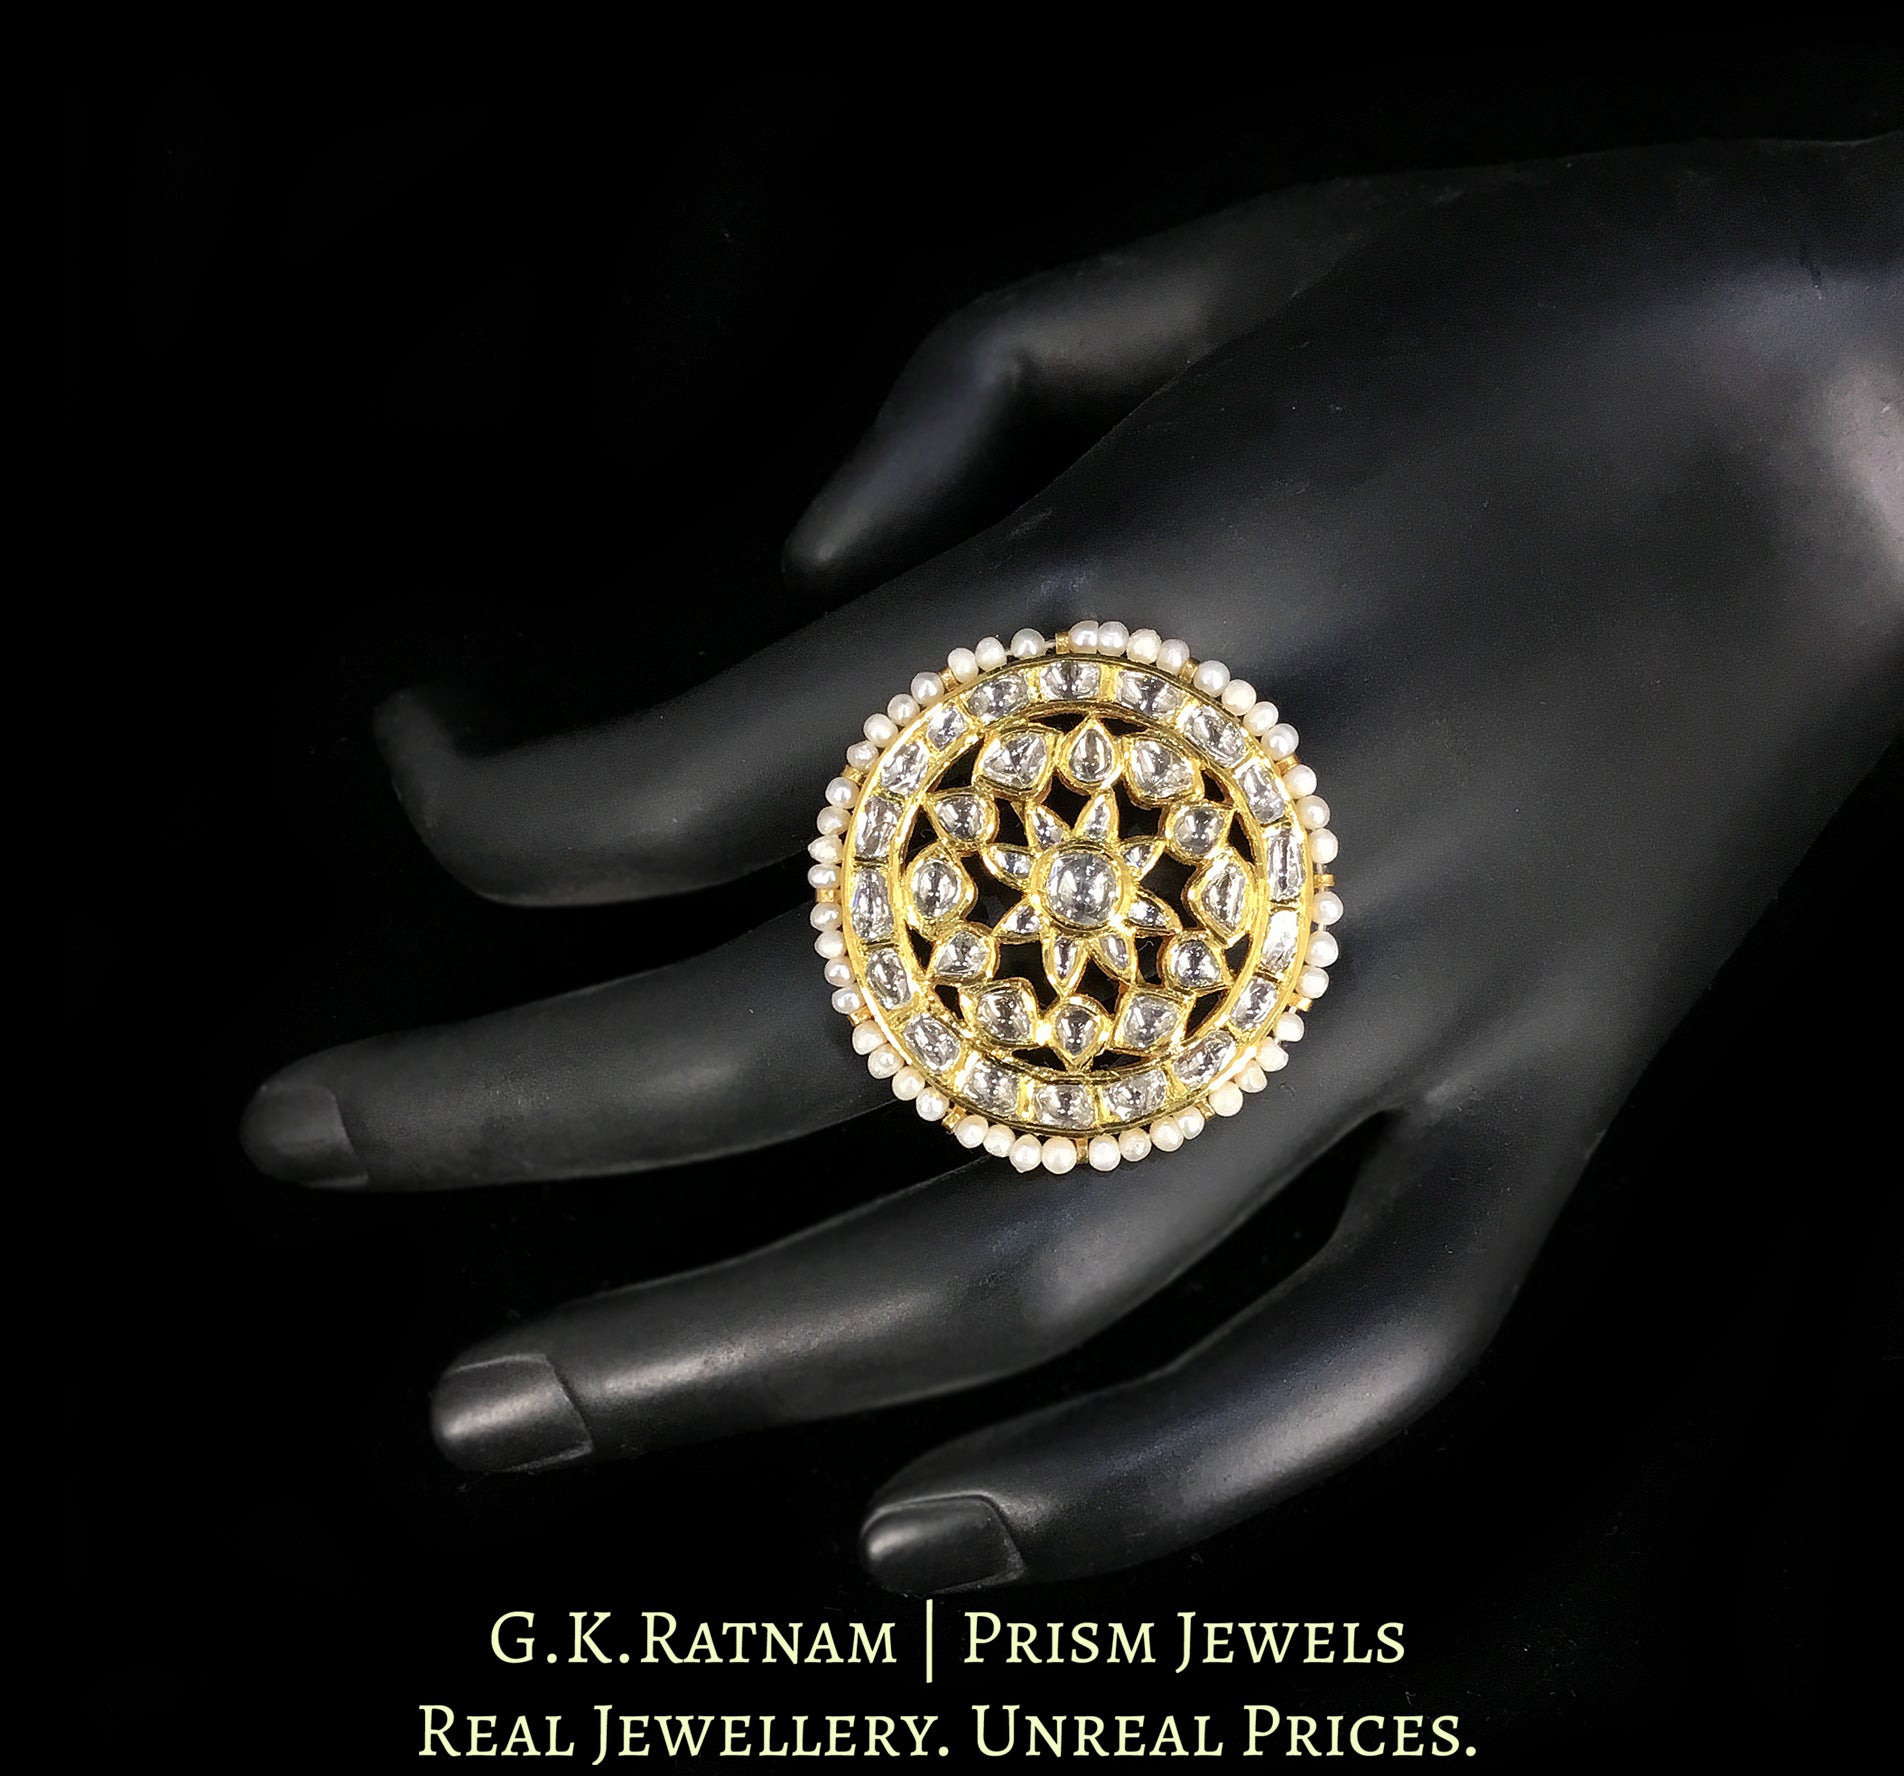 18k Gold and Diamond Polki Cocktail Ring with Hyderabadi Pearls